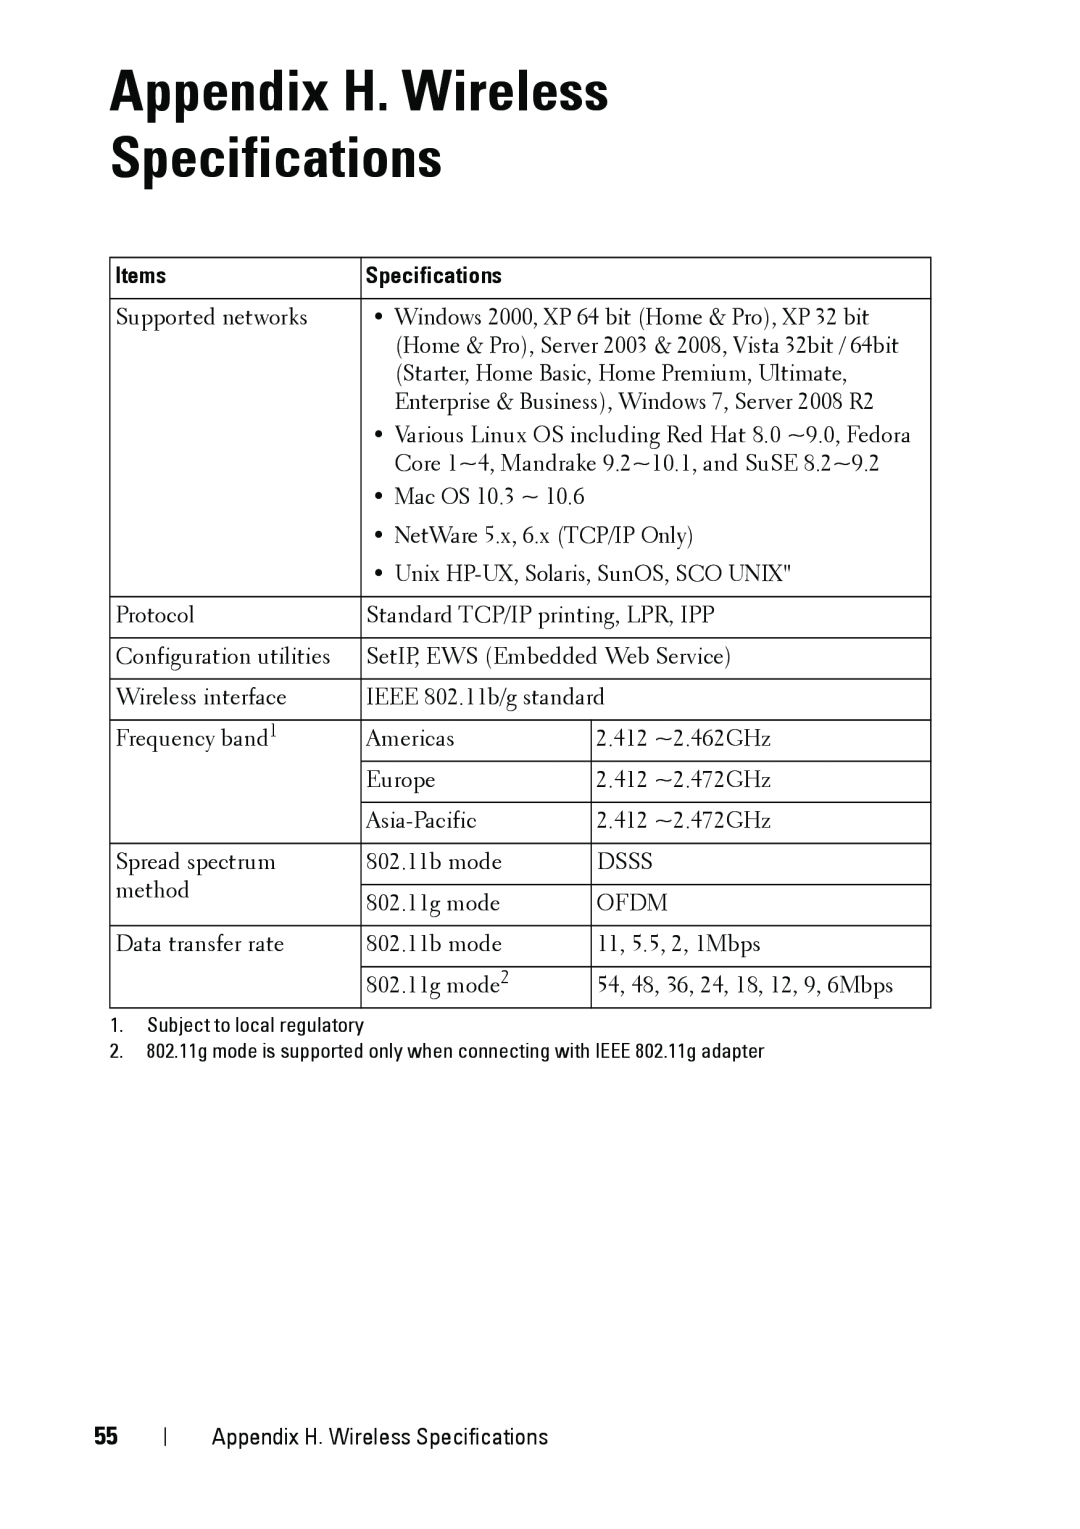 Dell 5002 manual Appendix H. Wireless Specifications, Items 